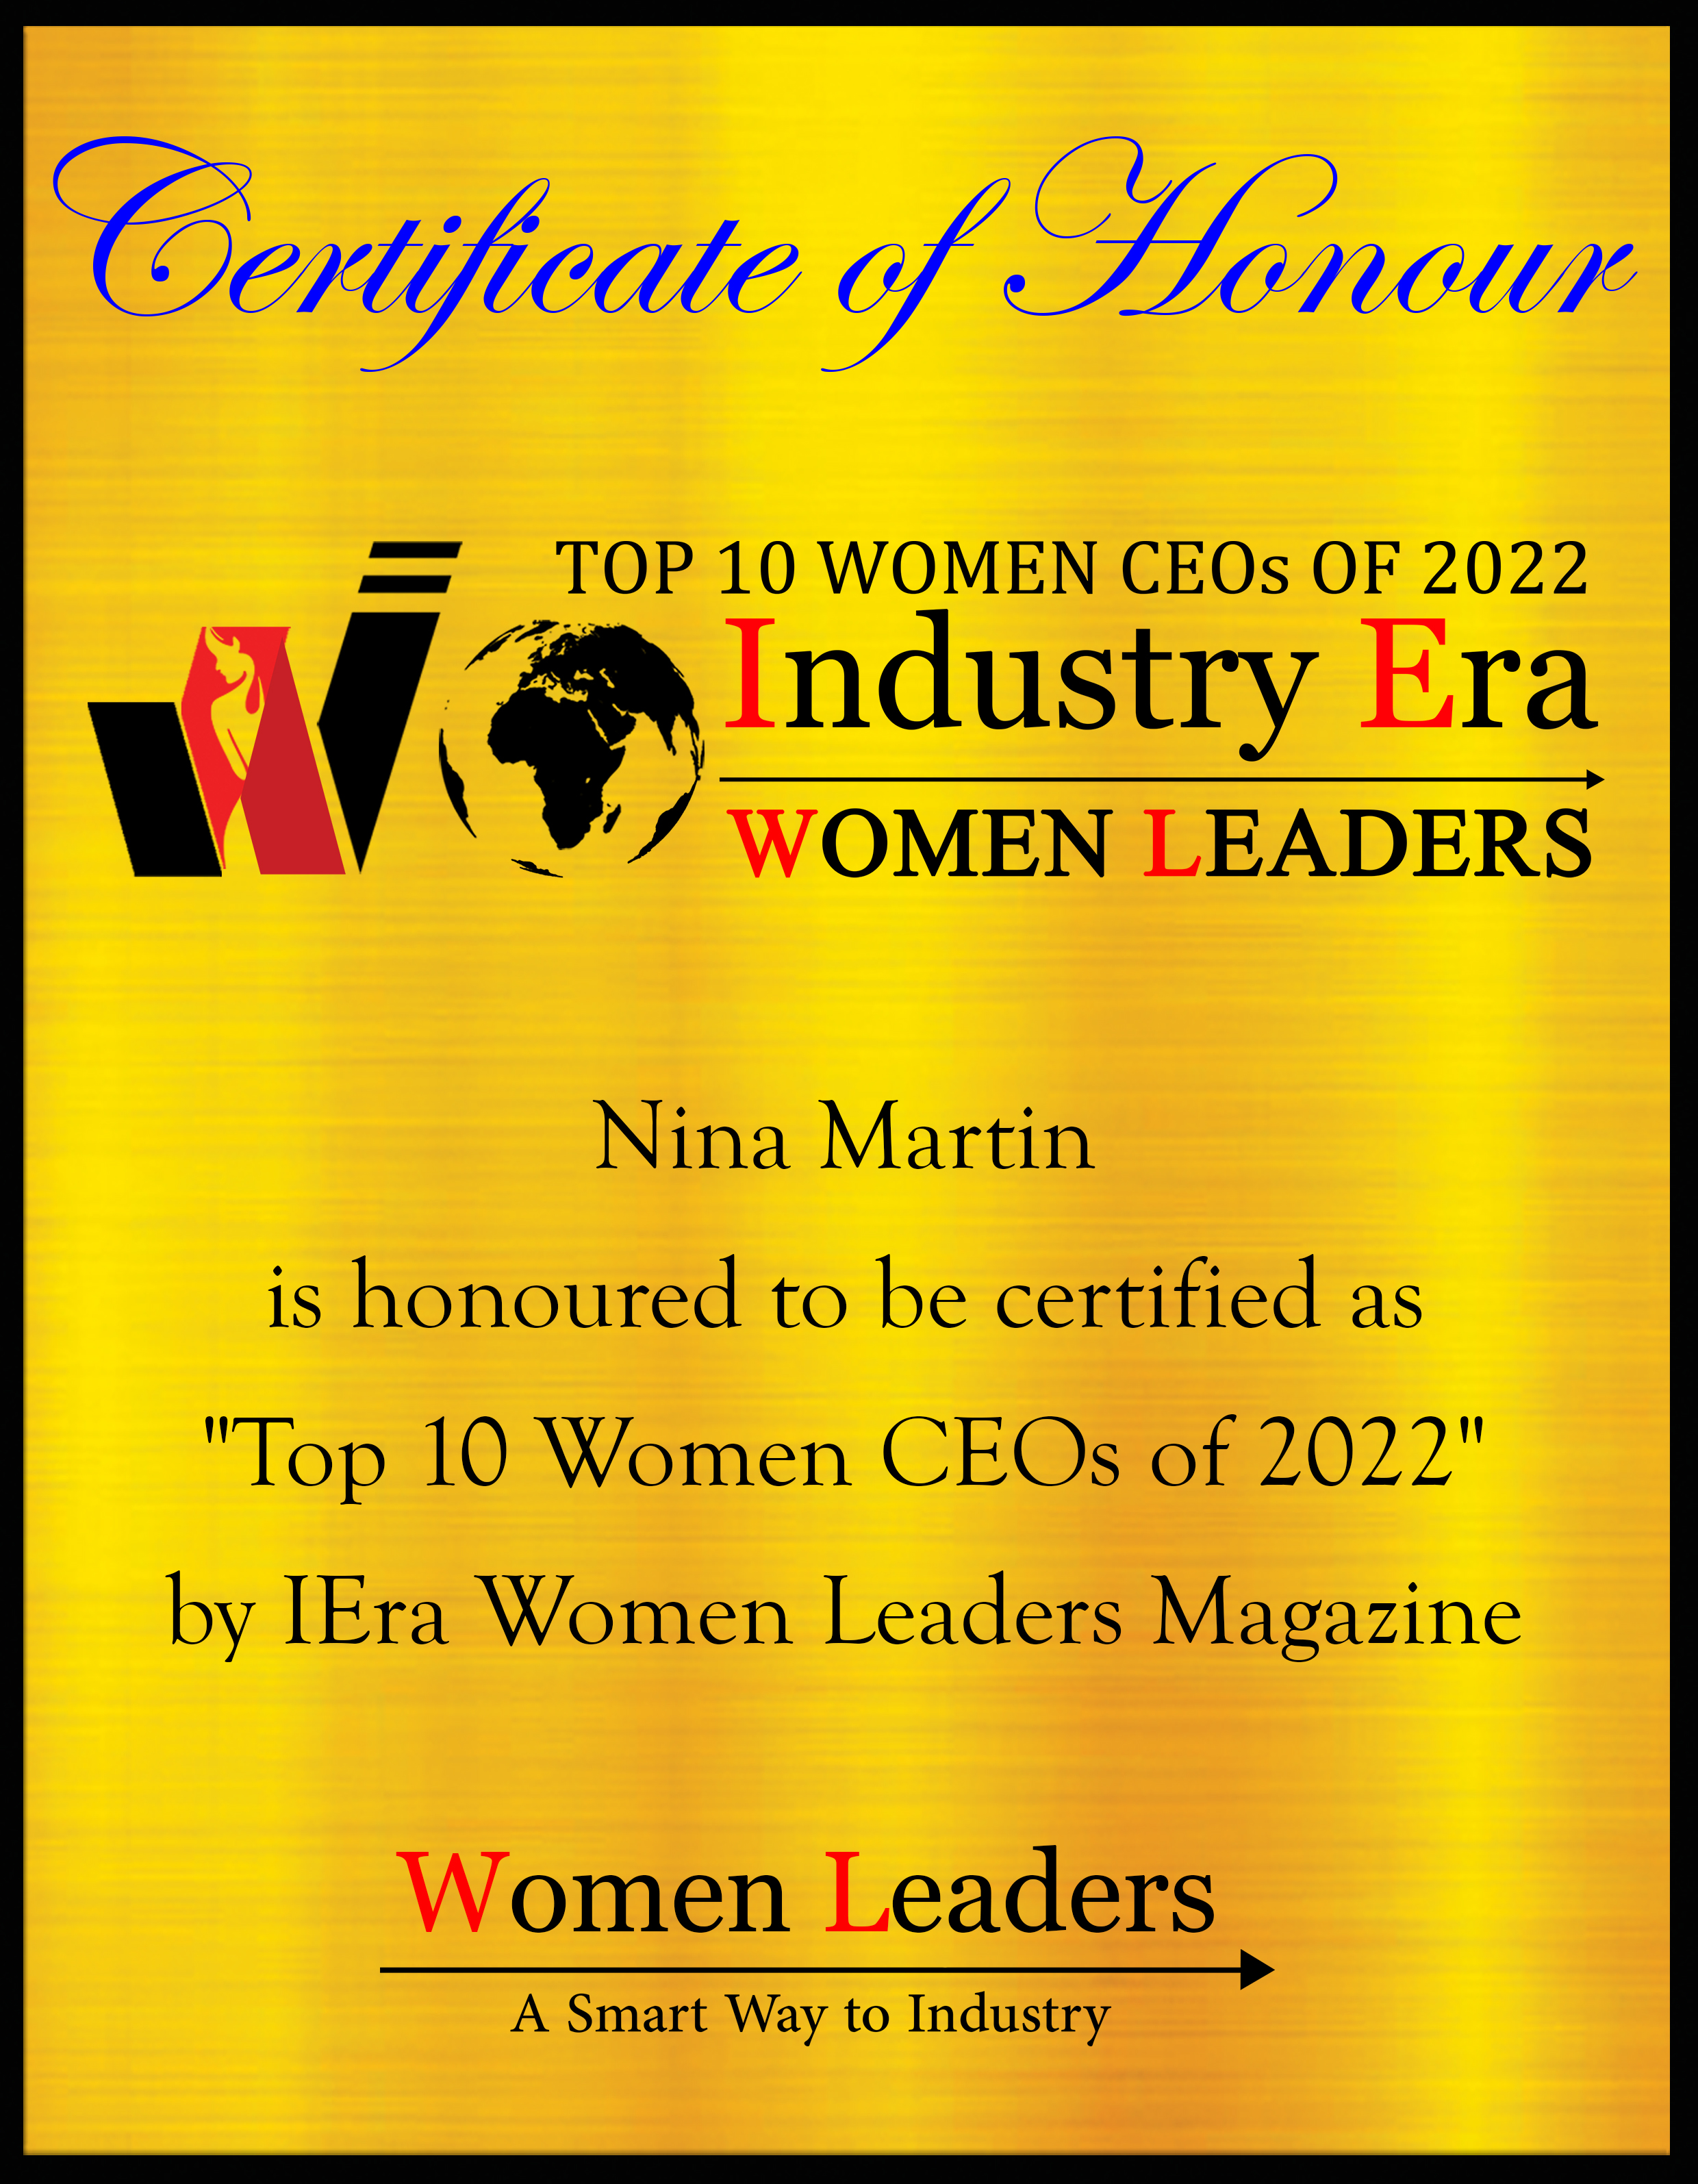 Dr Sally Rabi, Founder & CEO of Intellectus Education, Top 10 Women CEOs of 2022